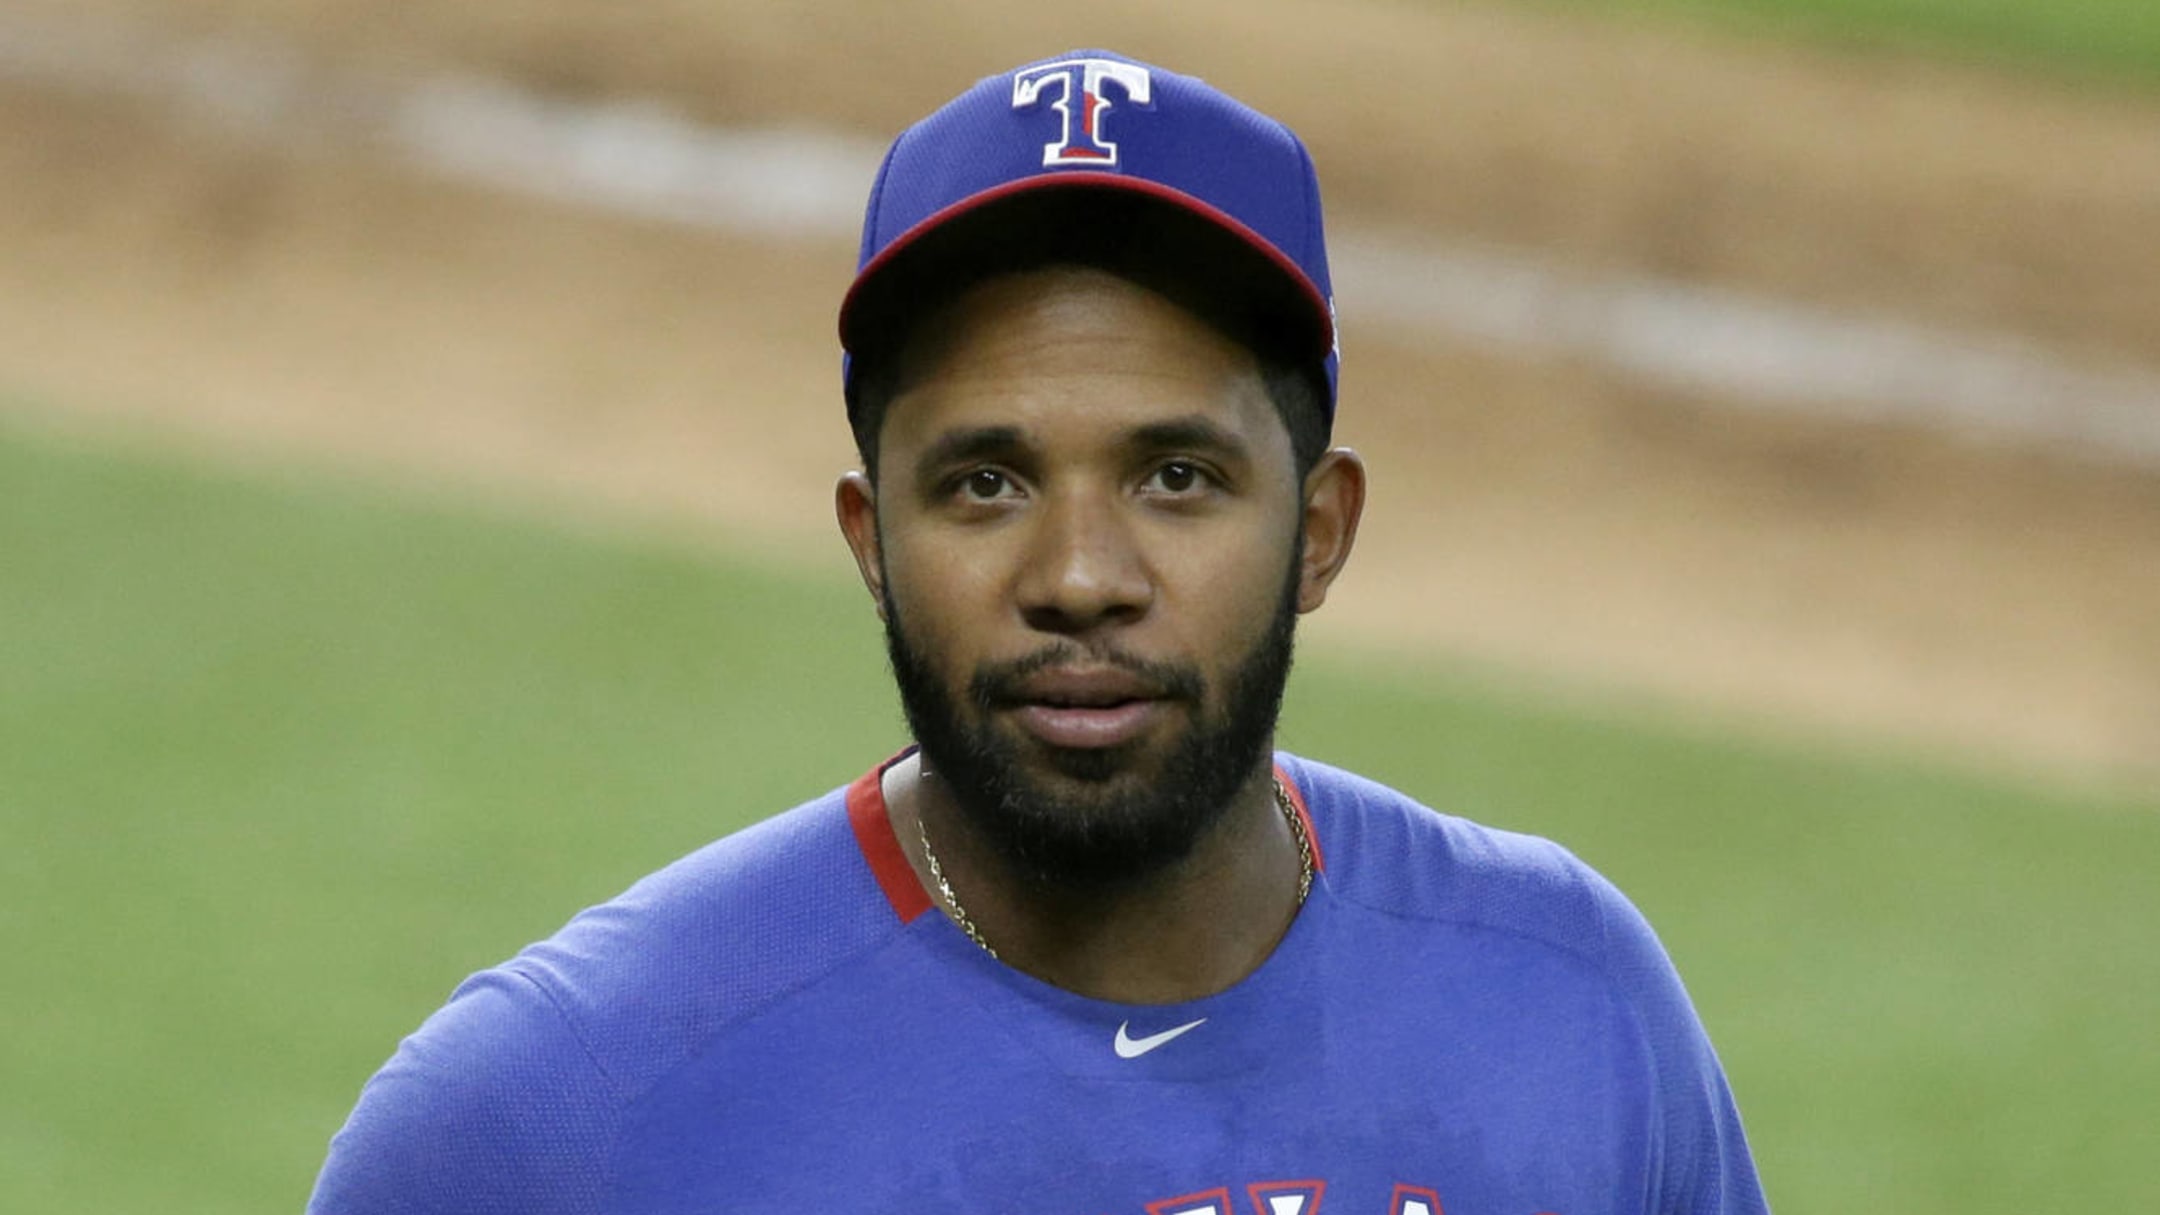 A's Elvis Andrus, a longtime Ranger, says return to Texas will be